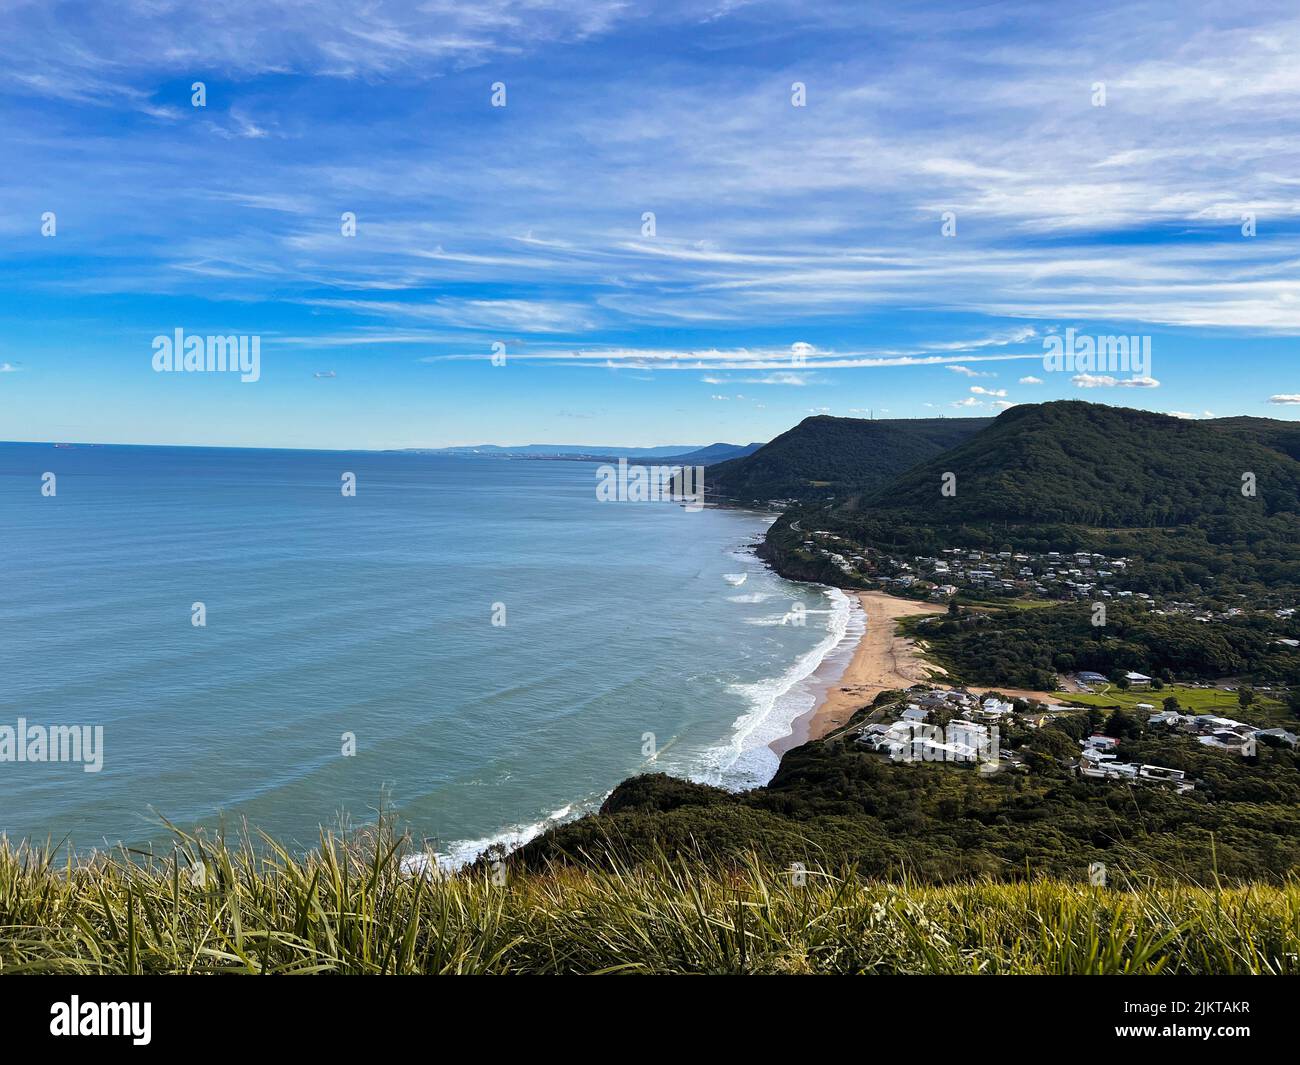 A scenic view of the coastline of Stanwell Park from Bald Hill Lookout, New South Wales, Australia Stock Photo